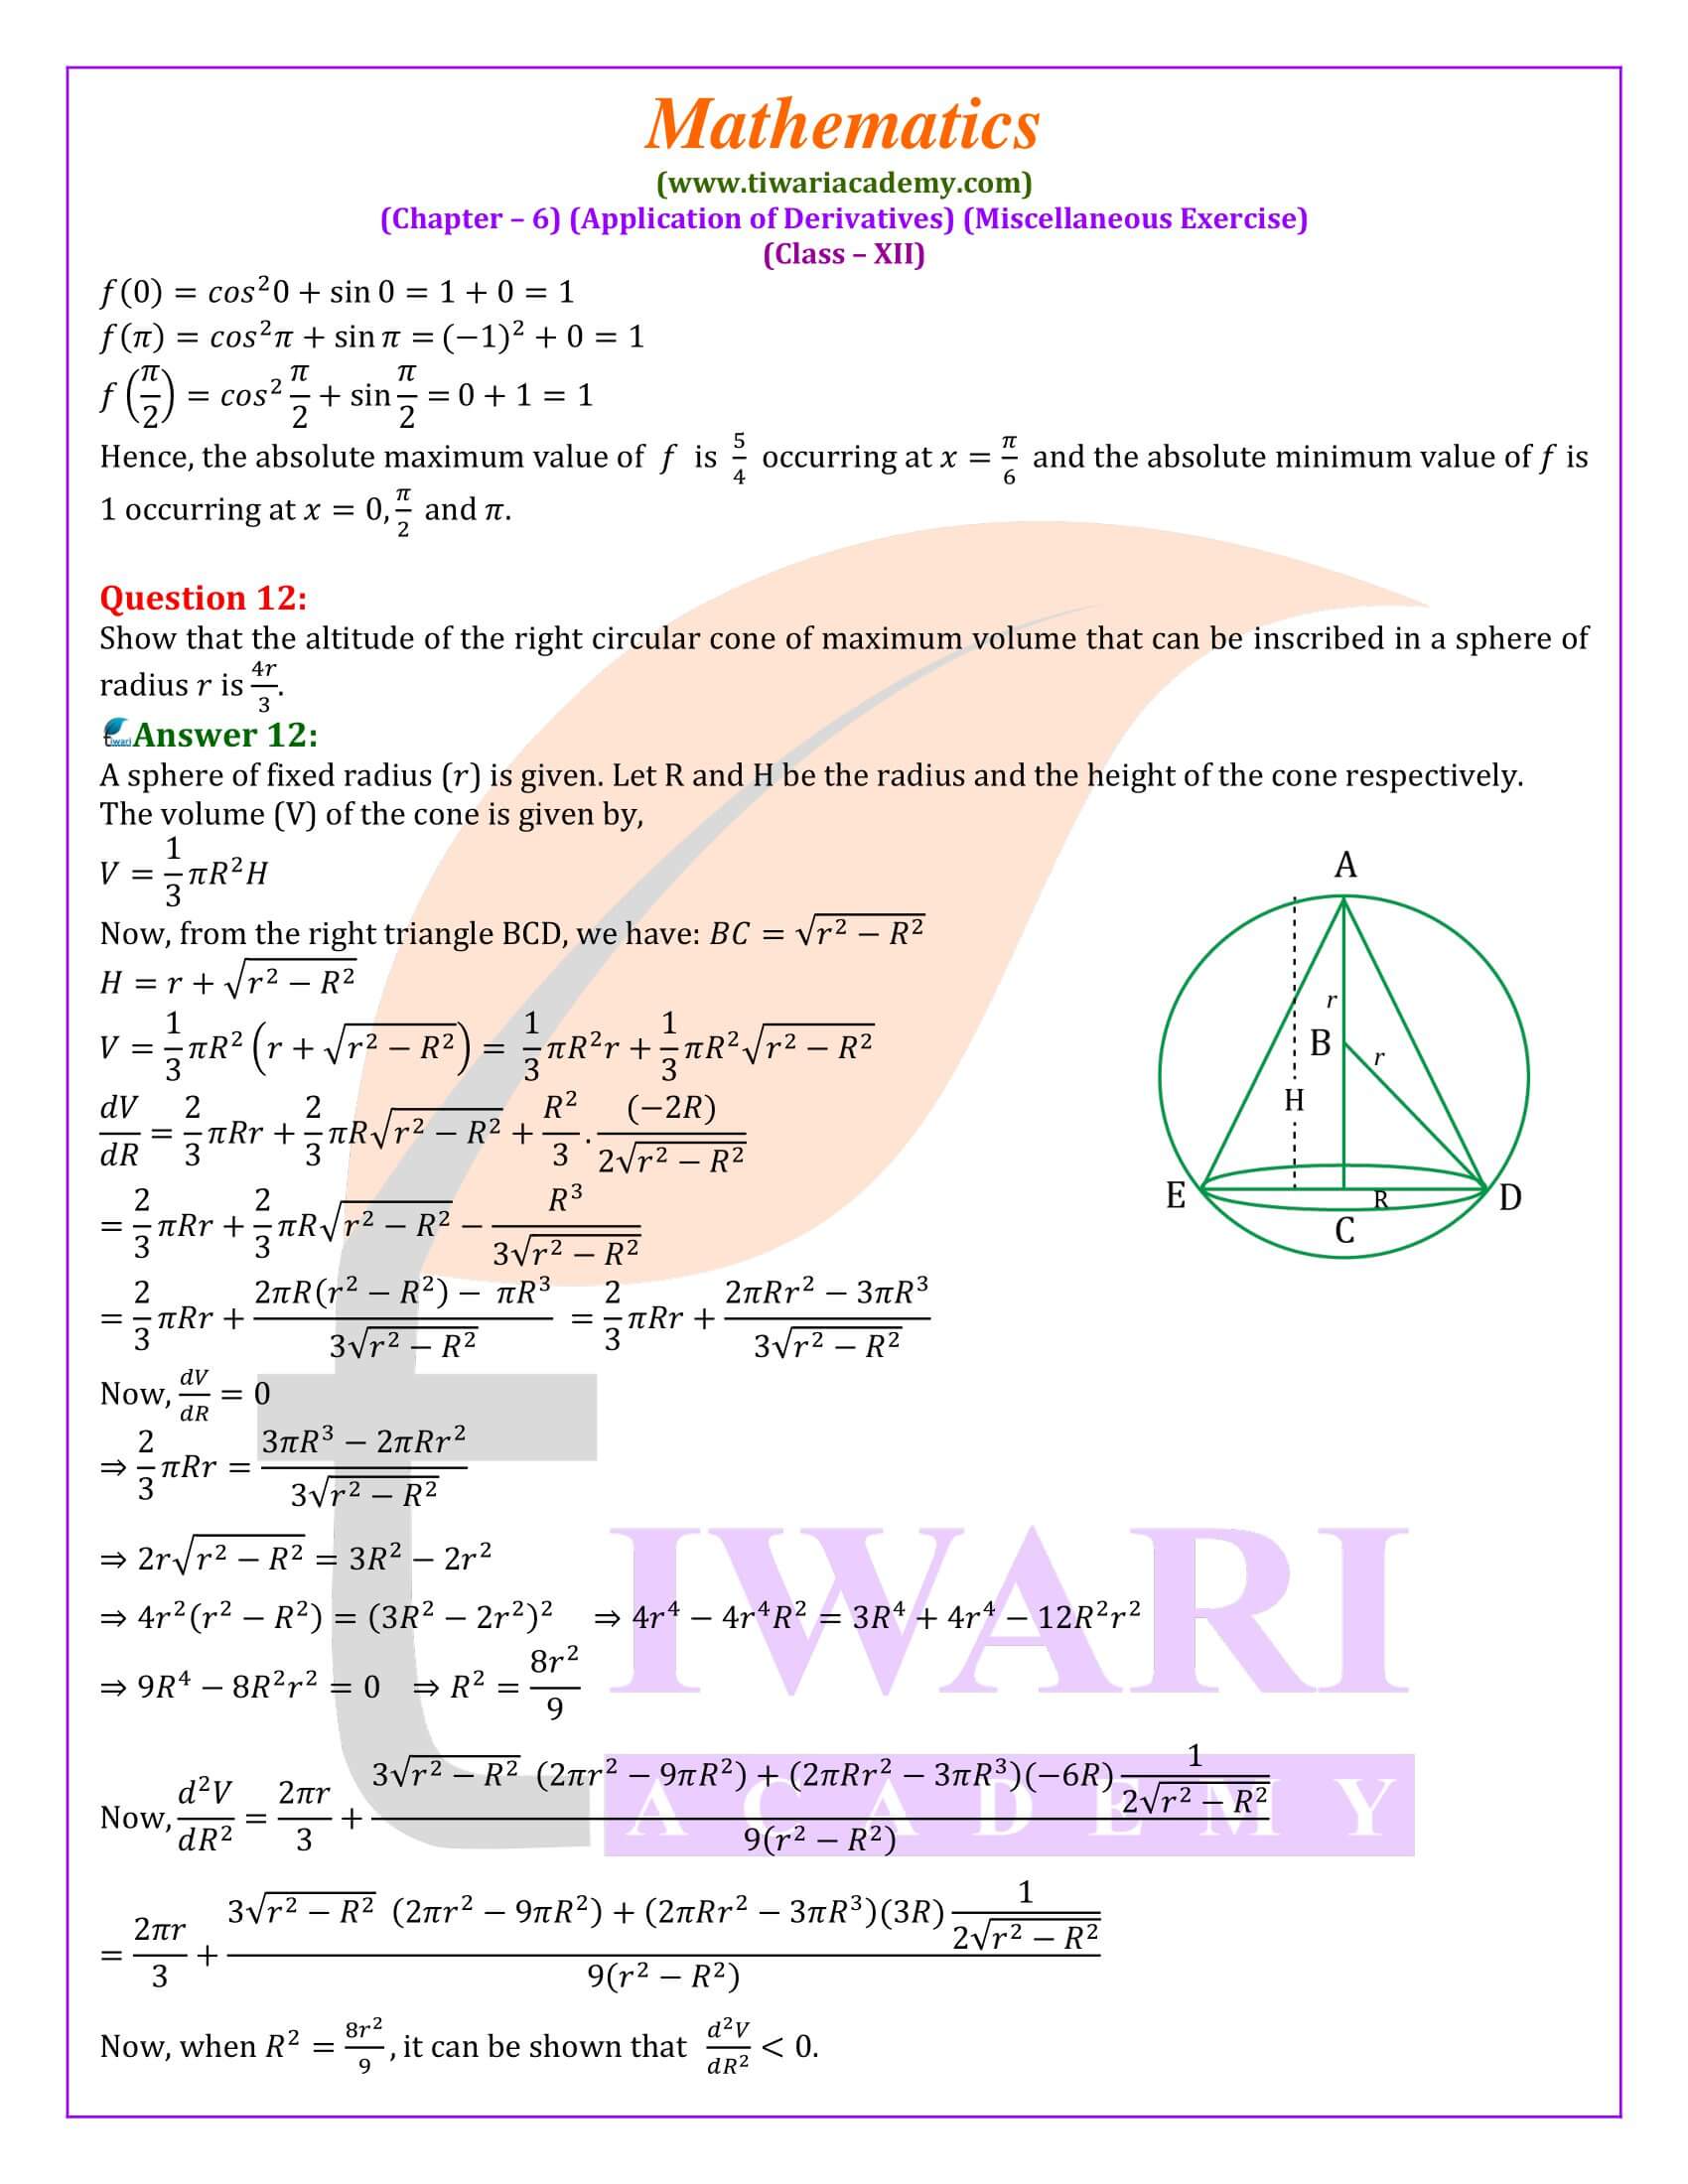 Class 12 Maths Misc. ex. 6 based on new syllabus